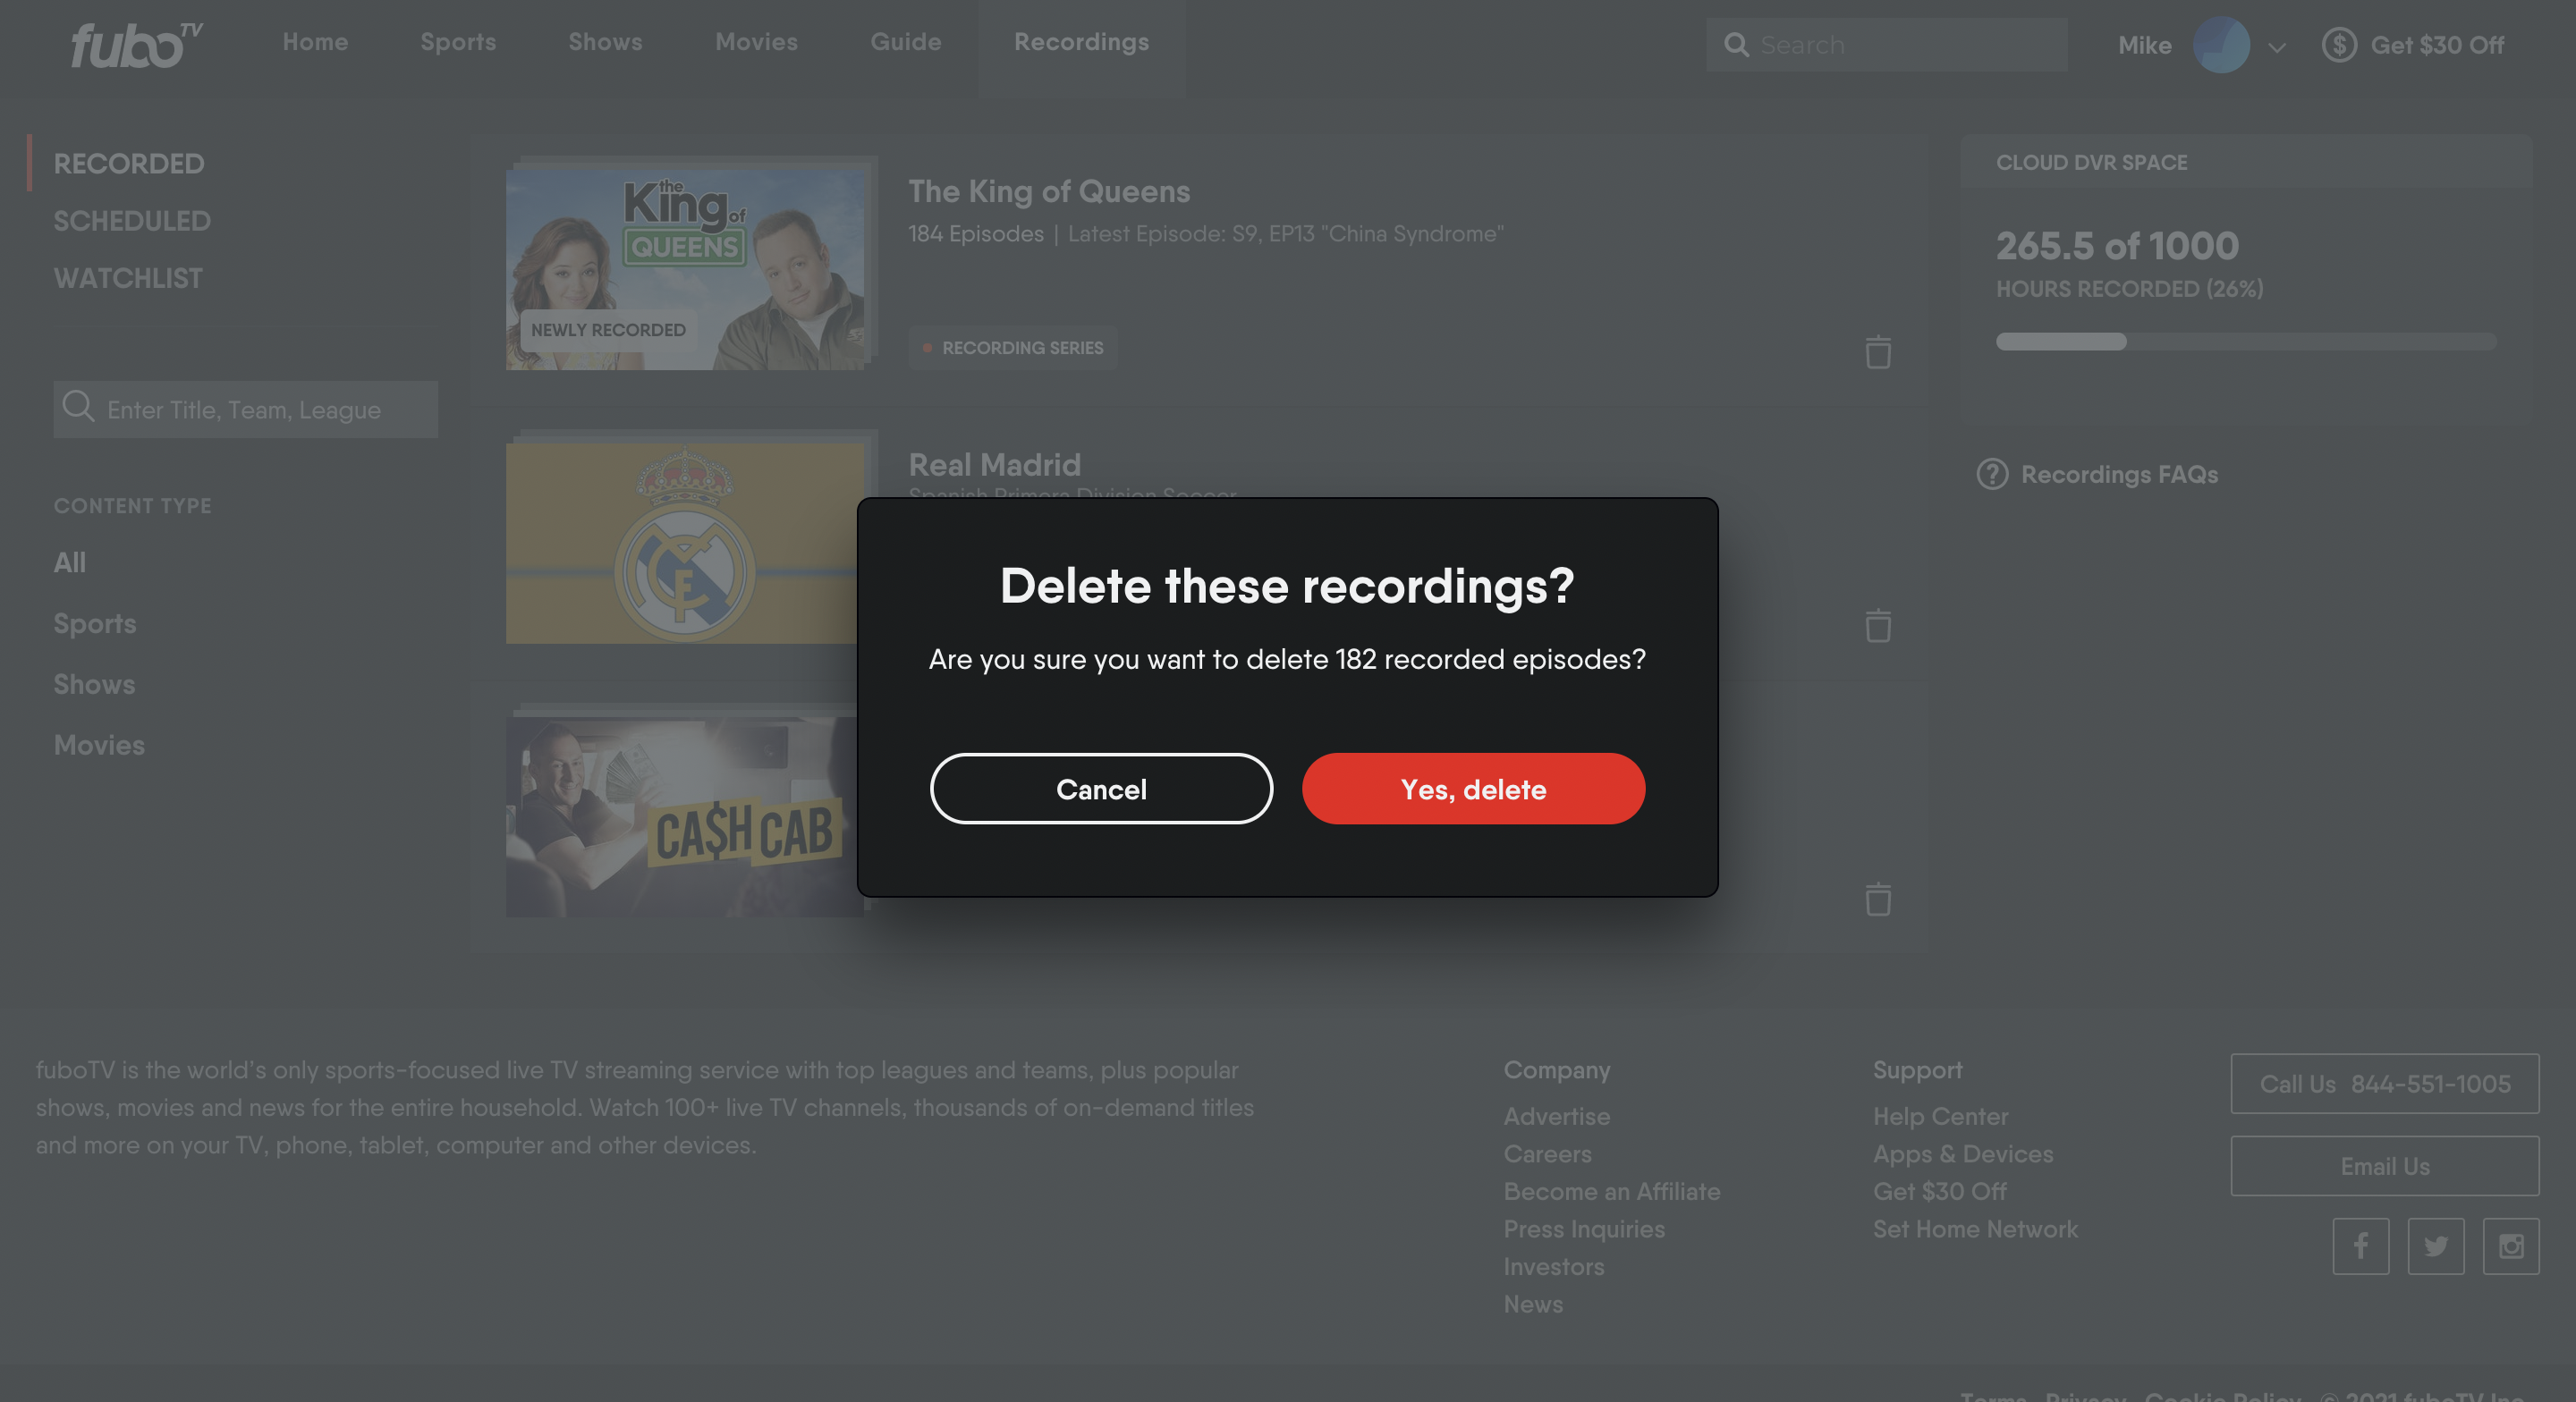 Recording deletion confirmation screen of the FuboTV app on a web browser with Yes, delete highlighted